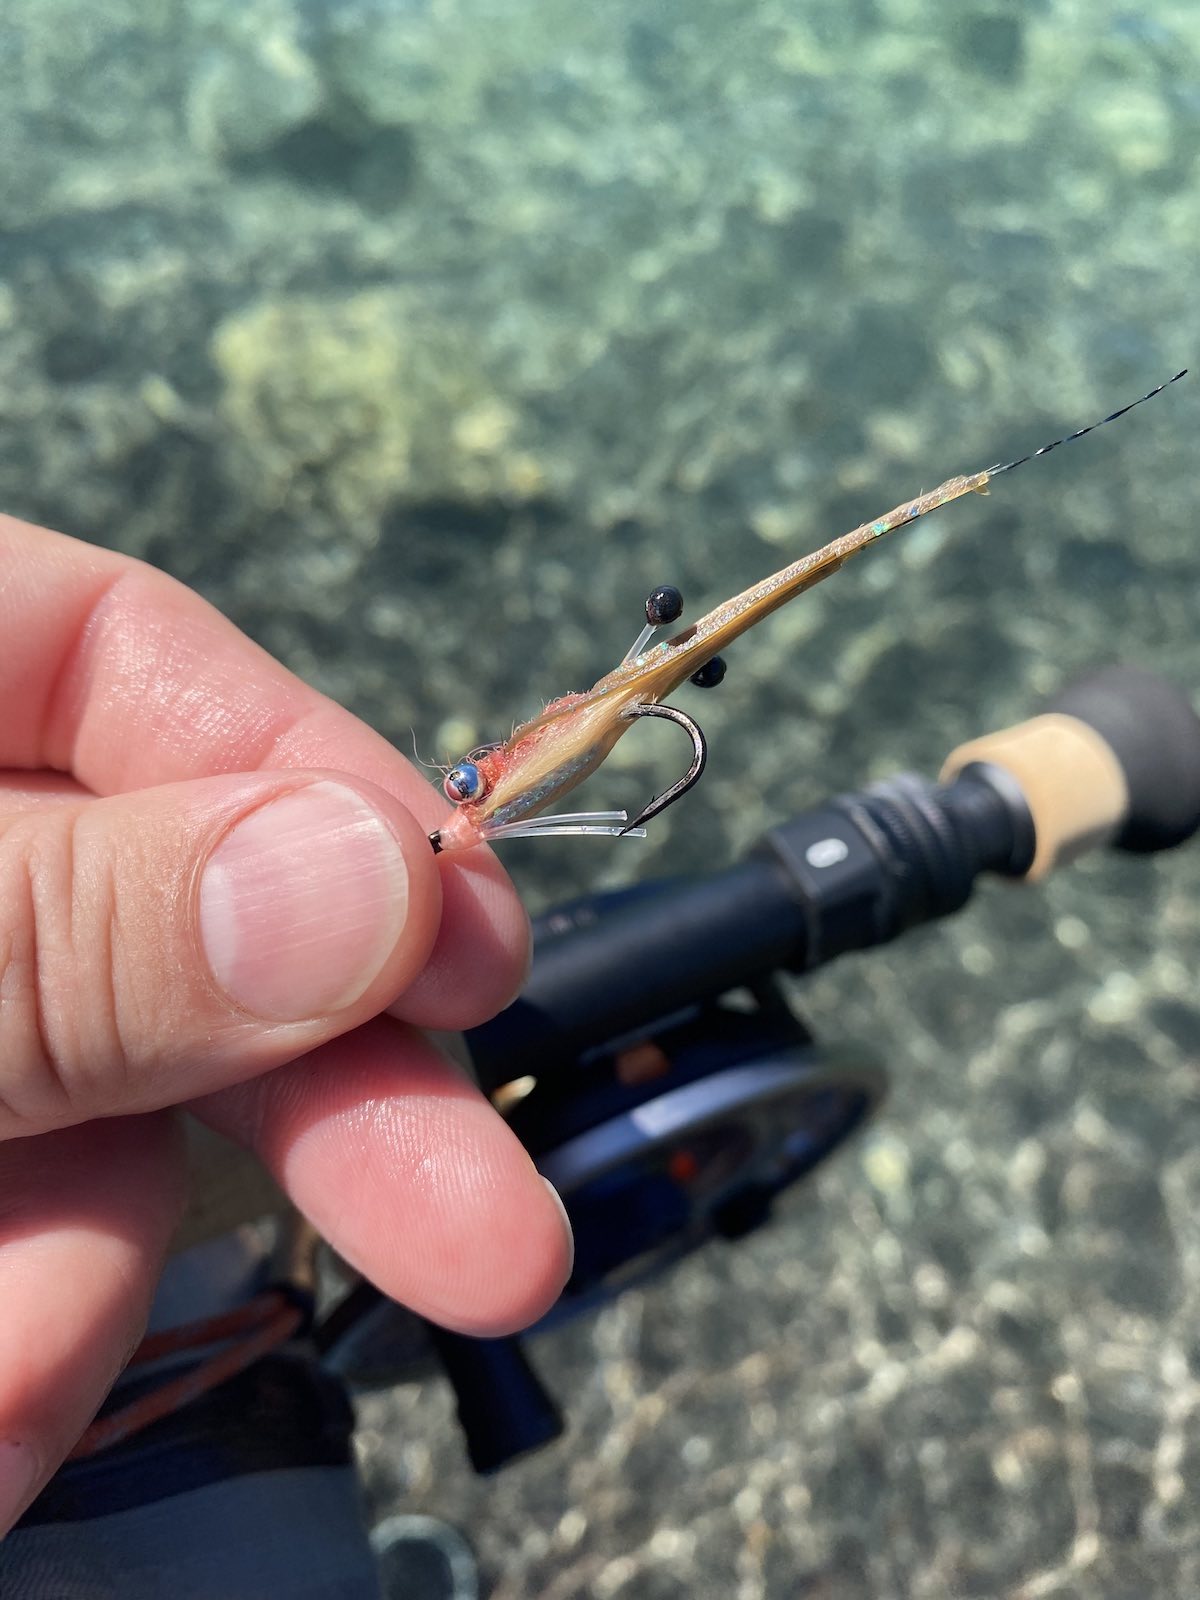 The best fly for catching cornetfish